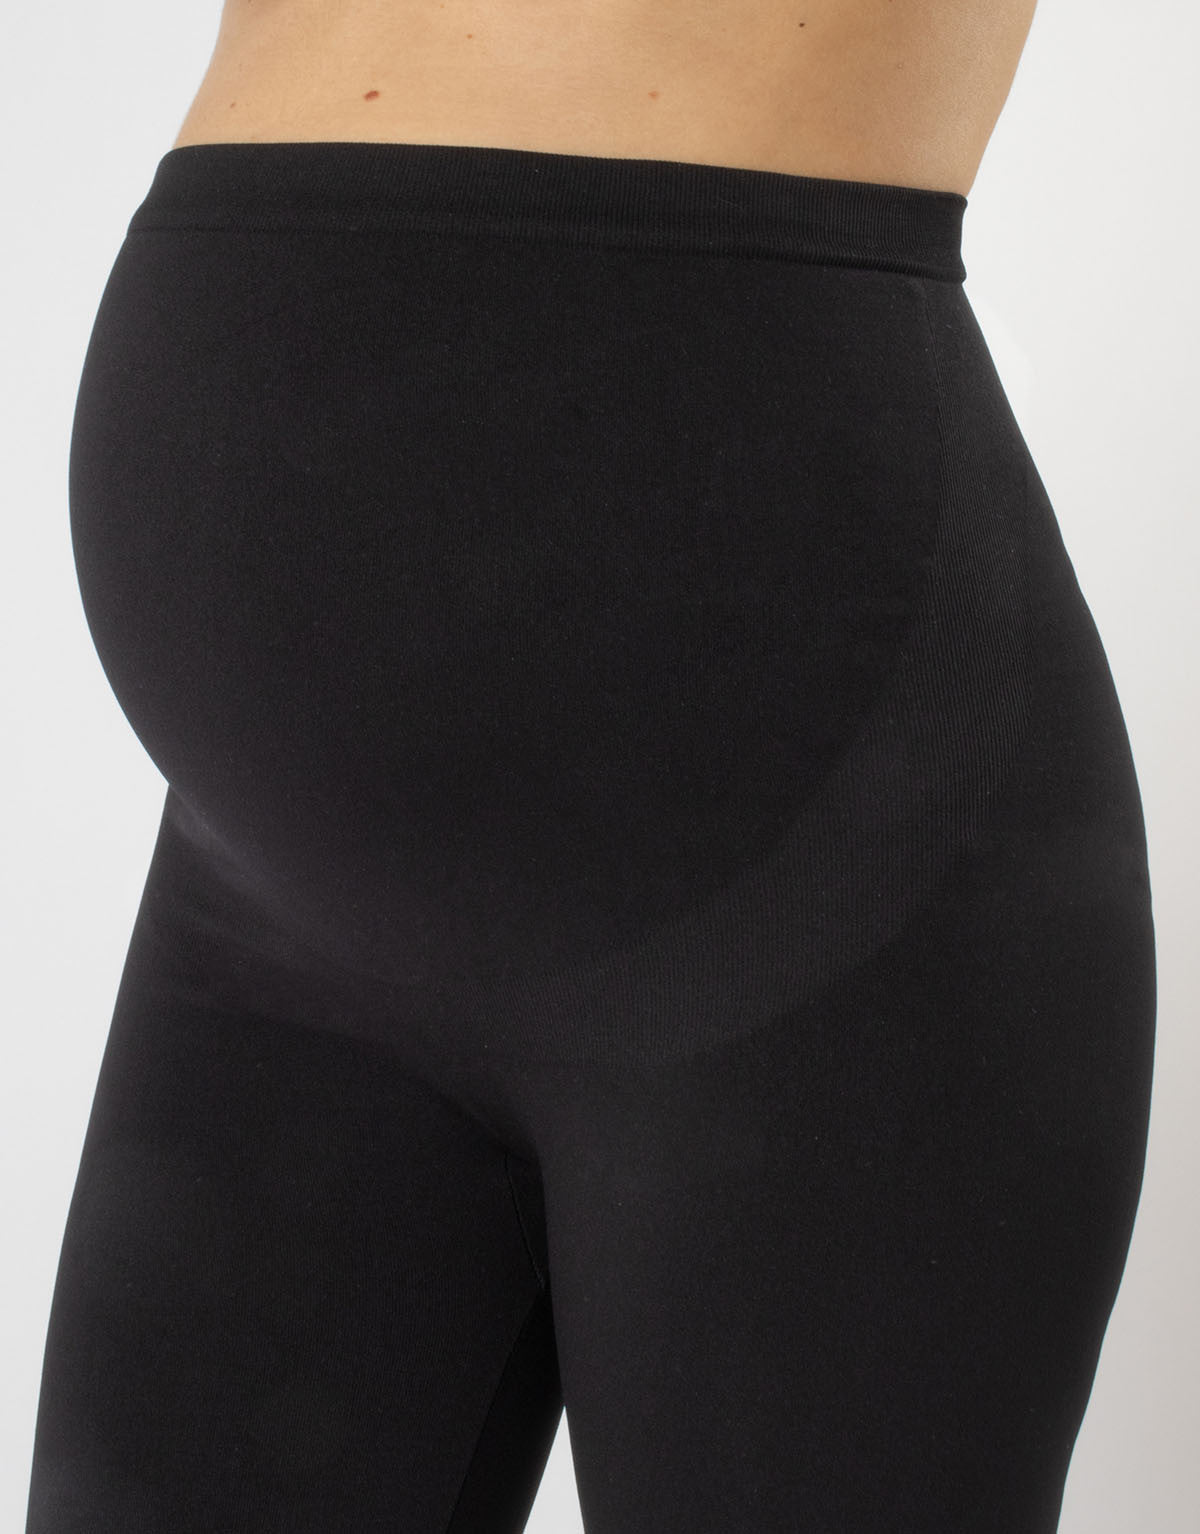 Calzitaly Maternity Leggings - Soft and plain black pregnancy leggings with a high waisted structured brief top for a comfortable fit throughout pregnancy.